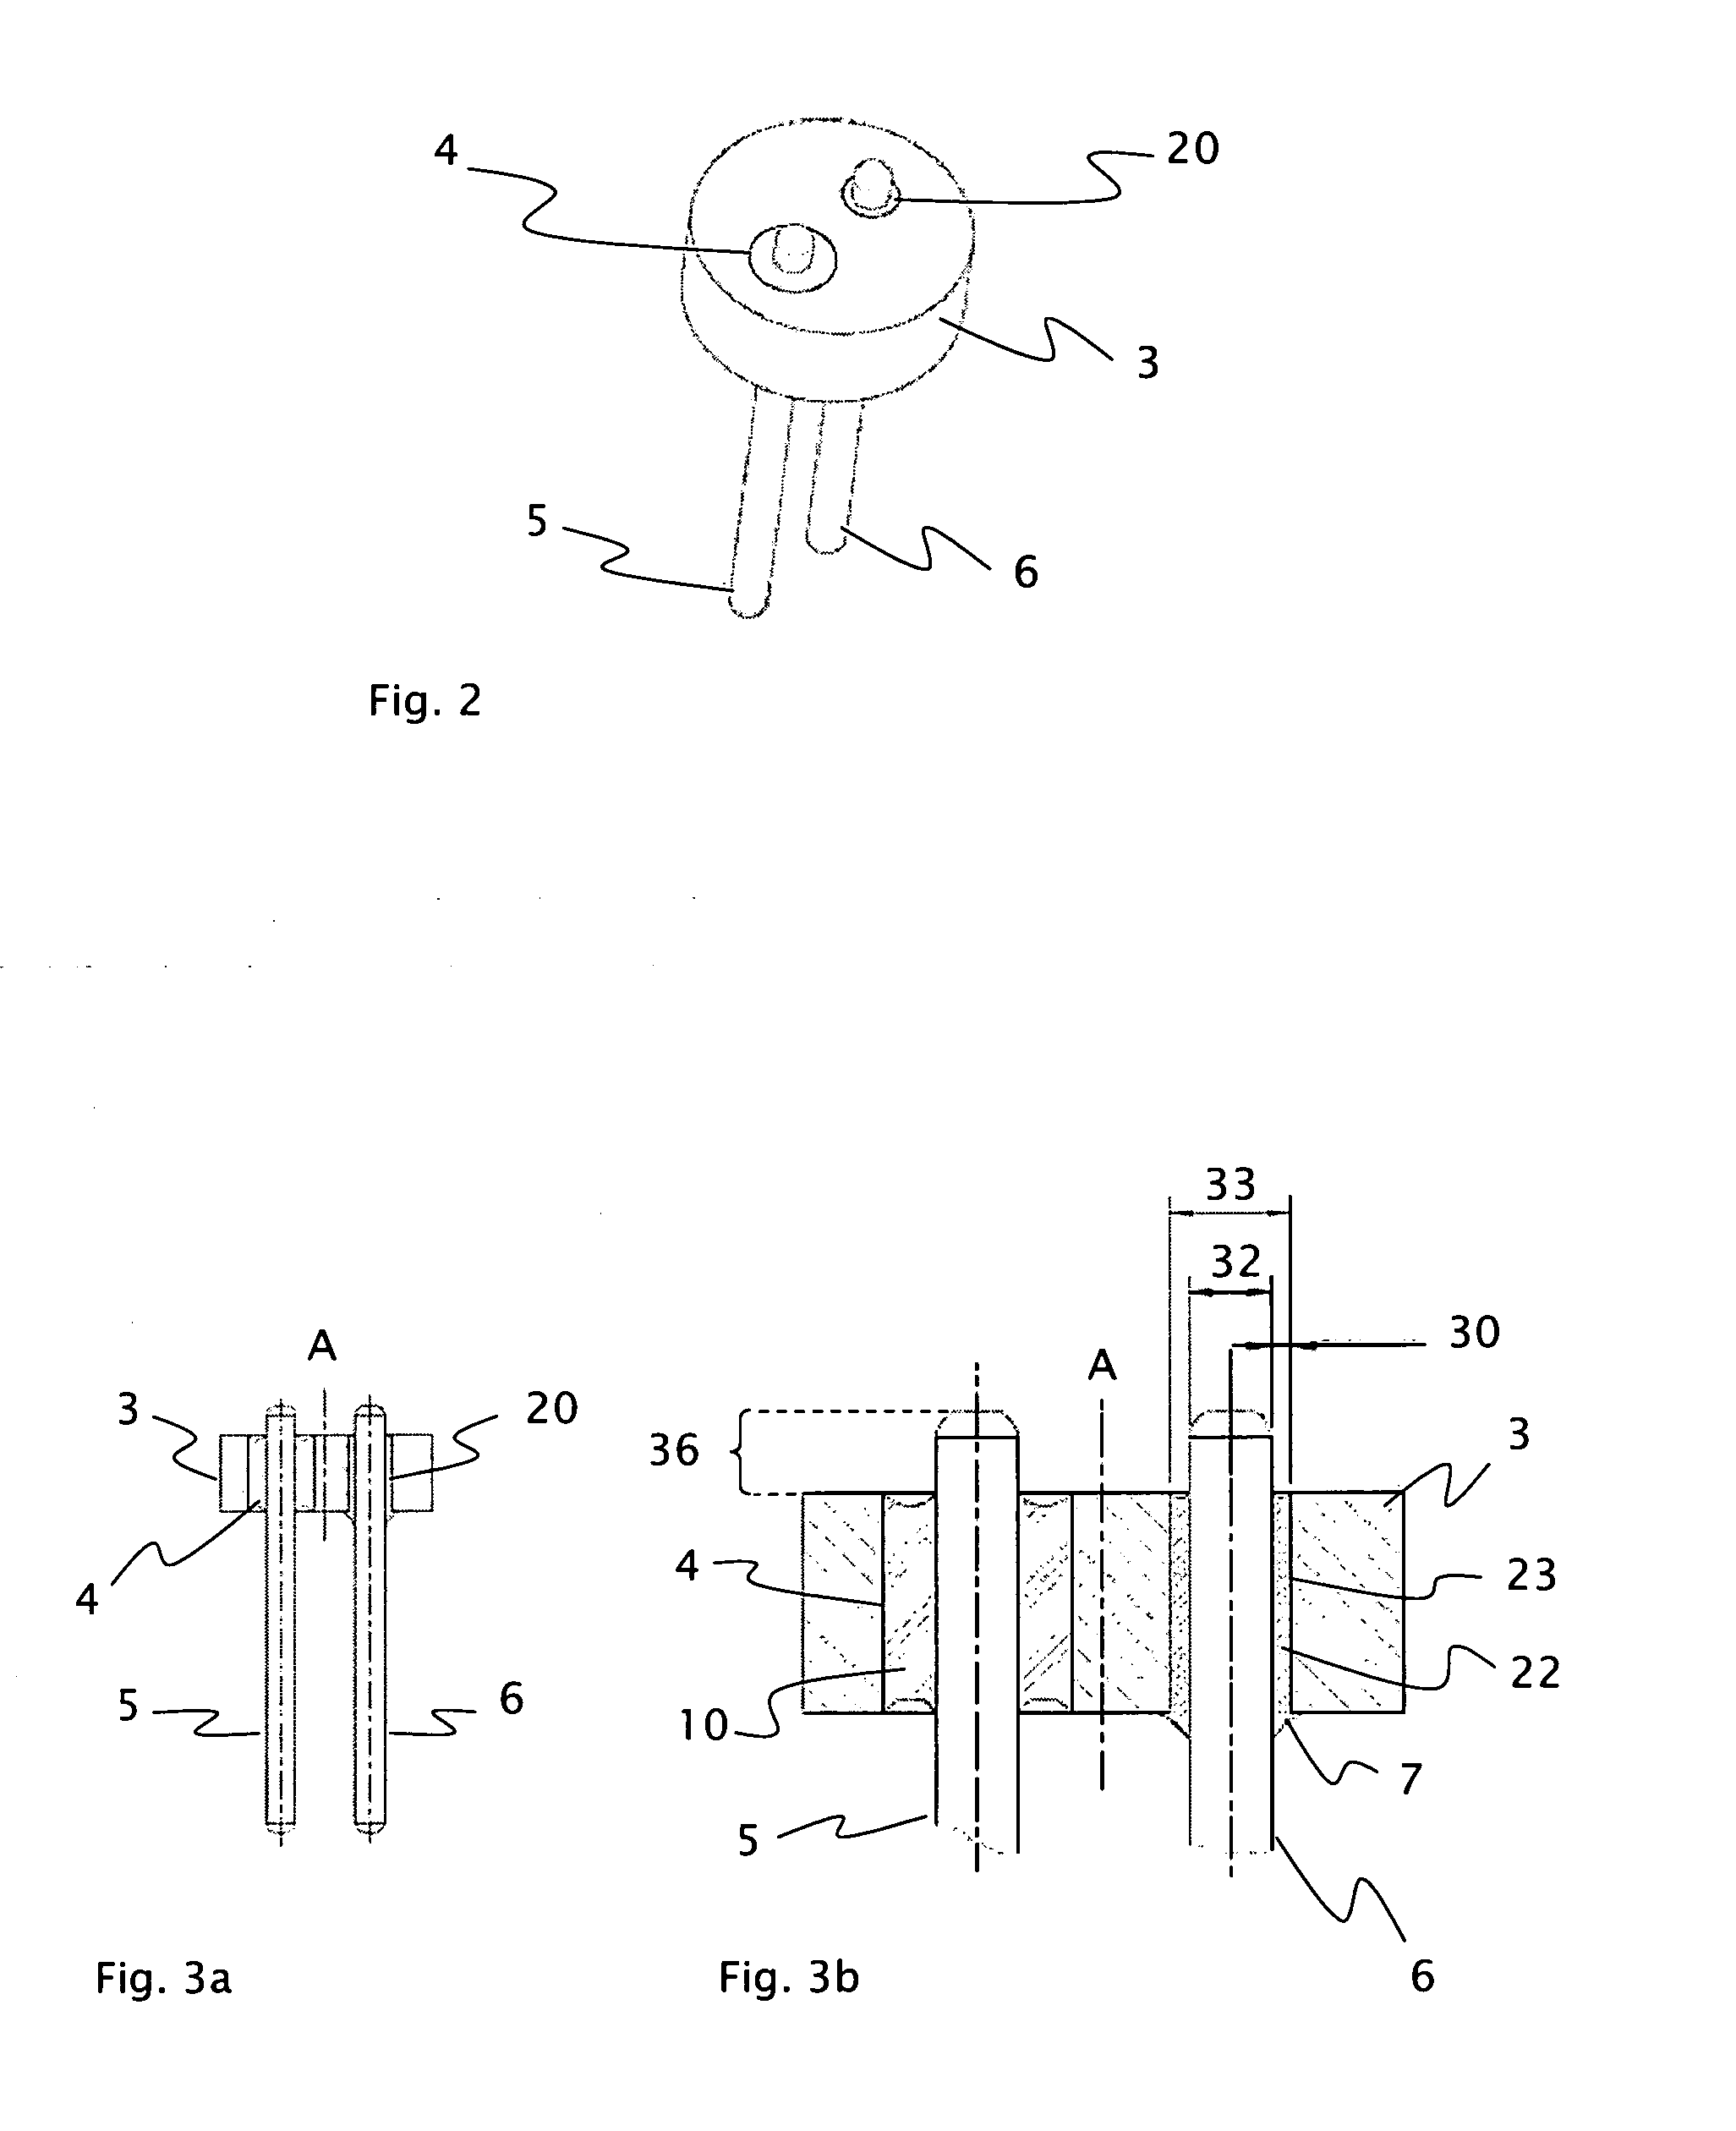 Shaped feed-through element with contact rod soldered in